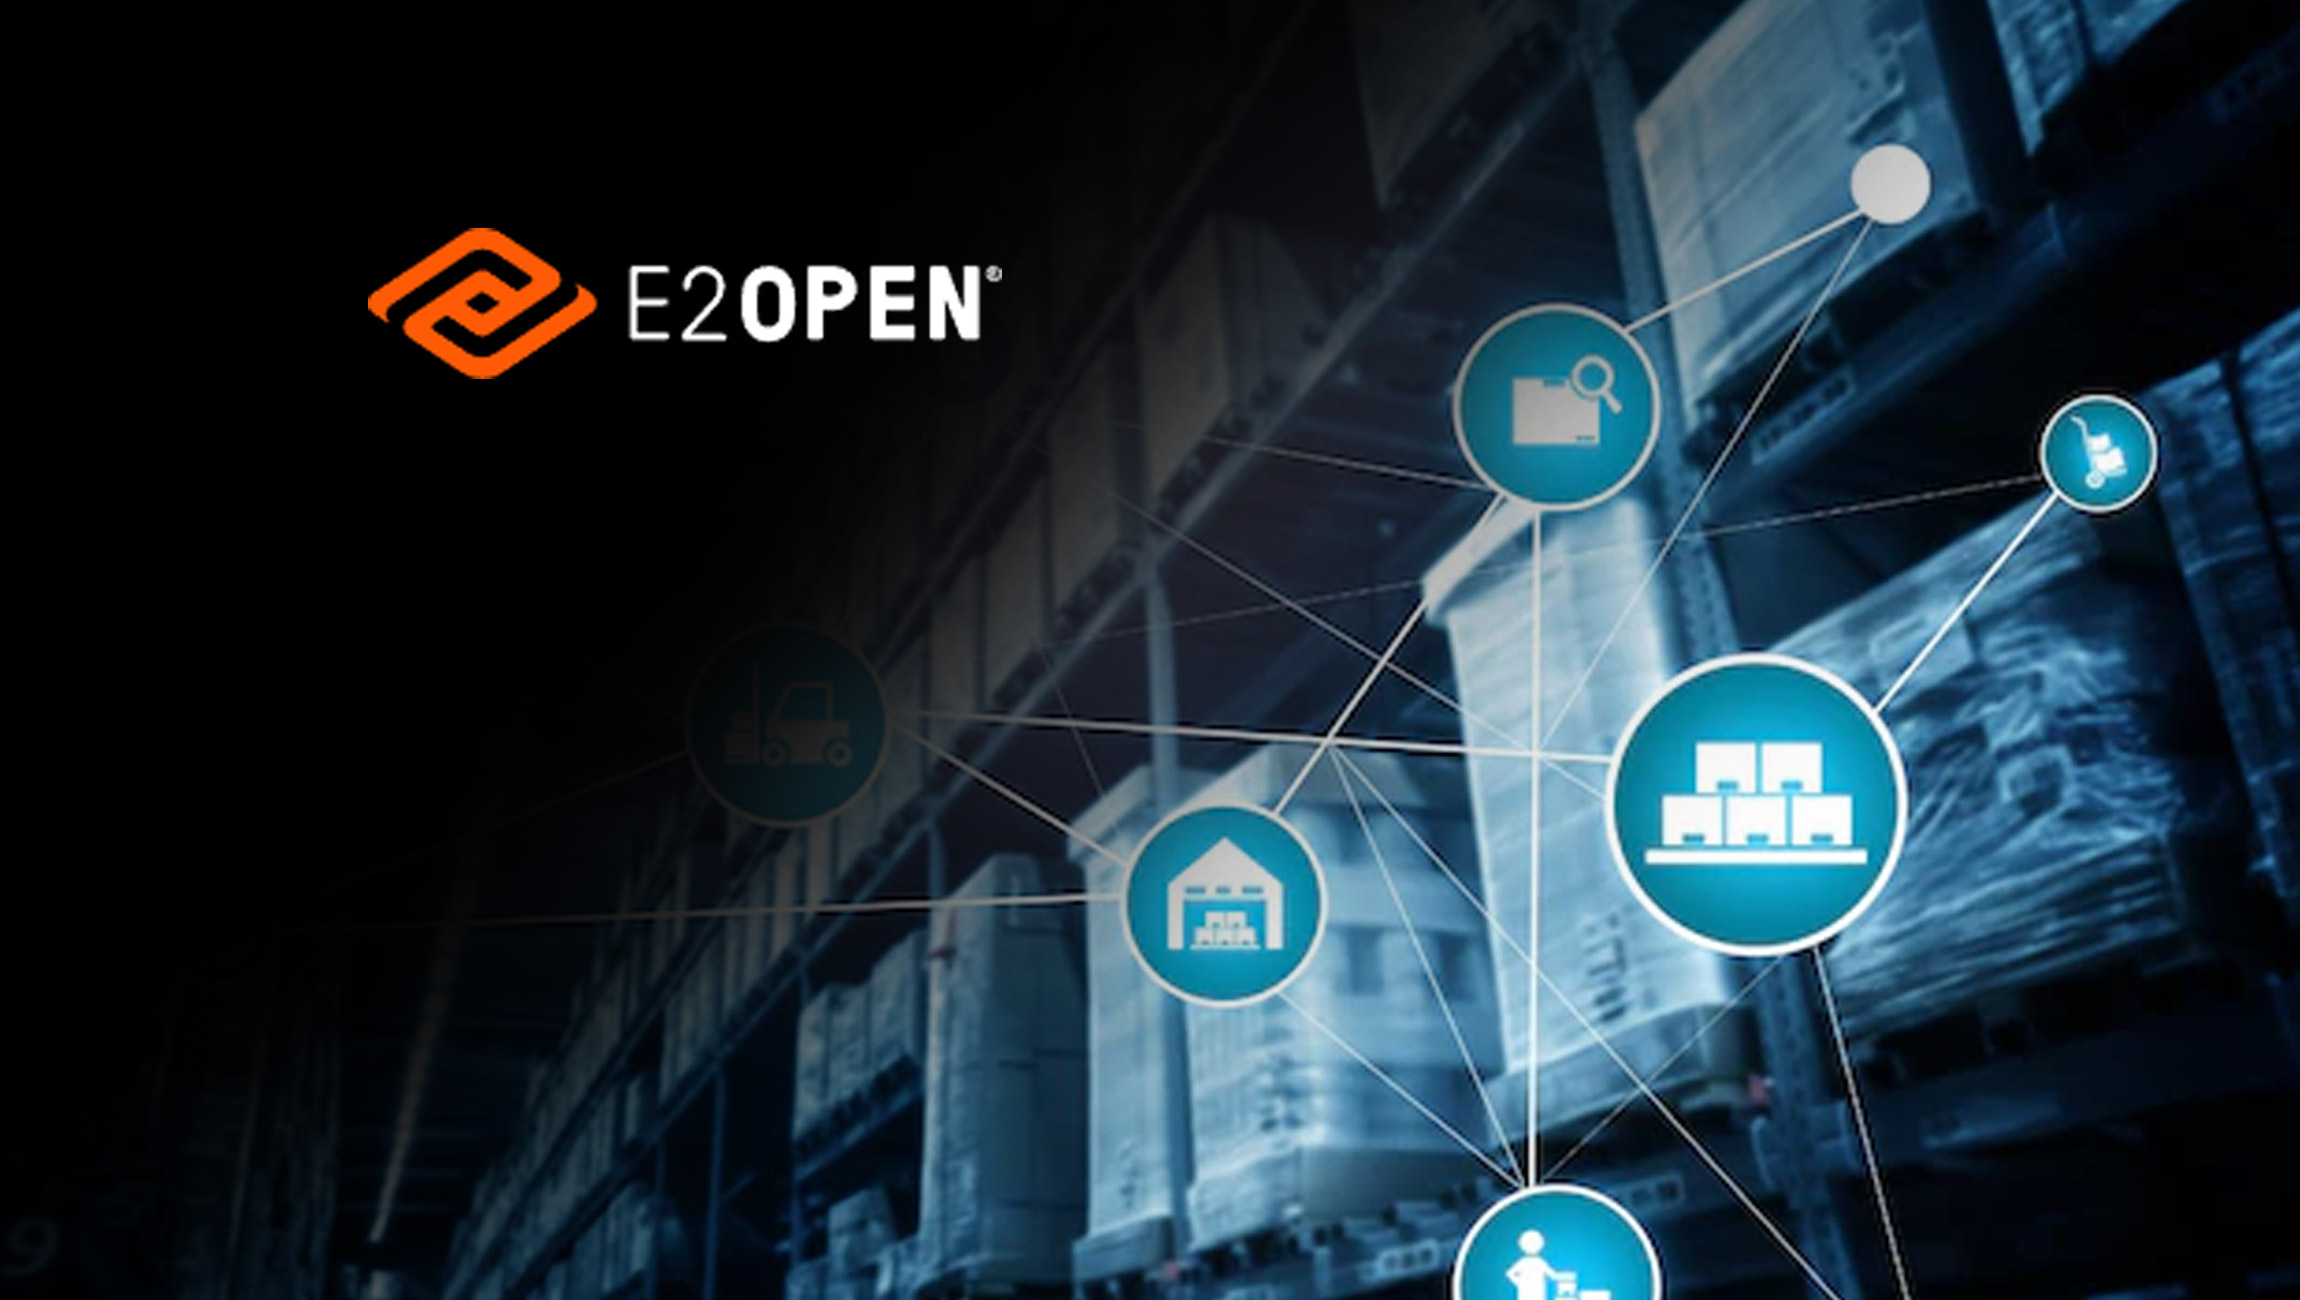 Connected Supply Chain Platform e2open® Provides Transformative Solution for Makers, Movers, and Sellers of the World’s Goods and Services